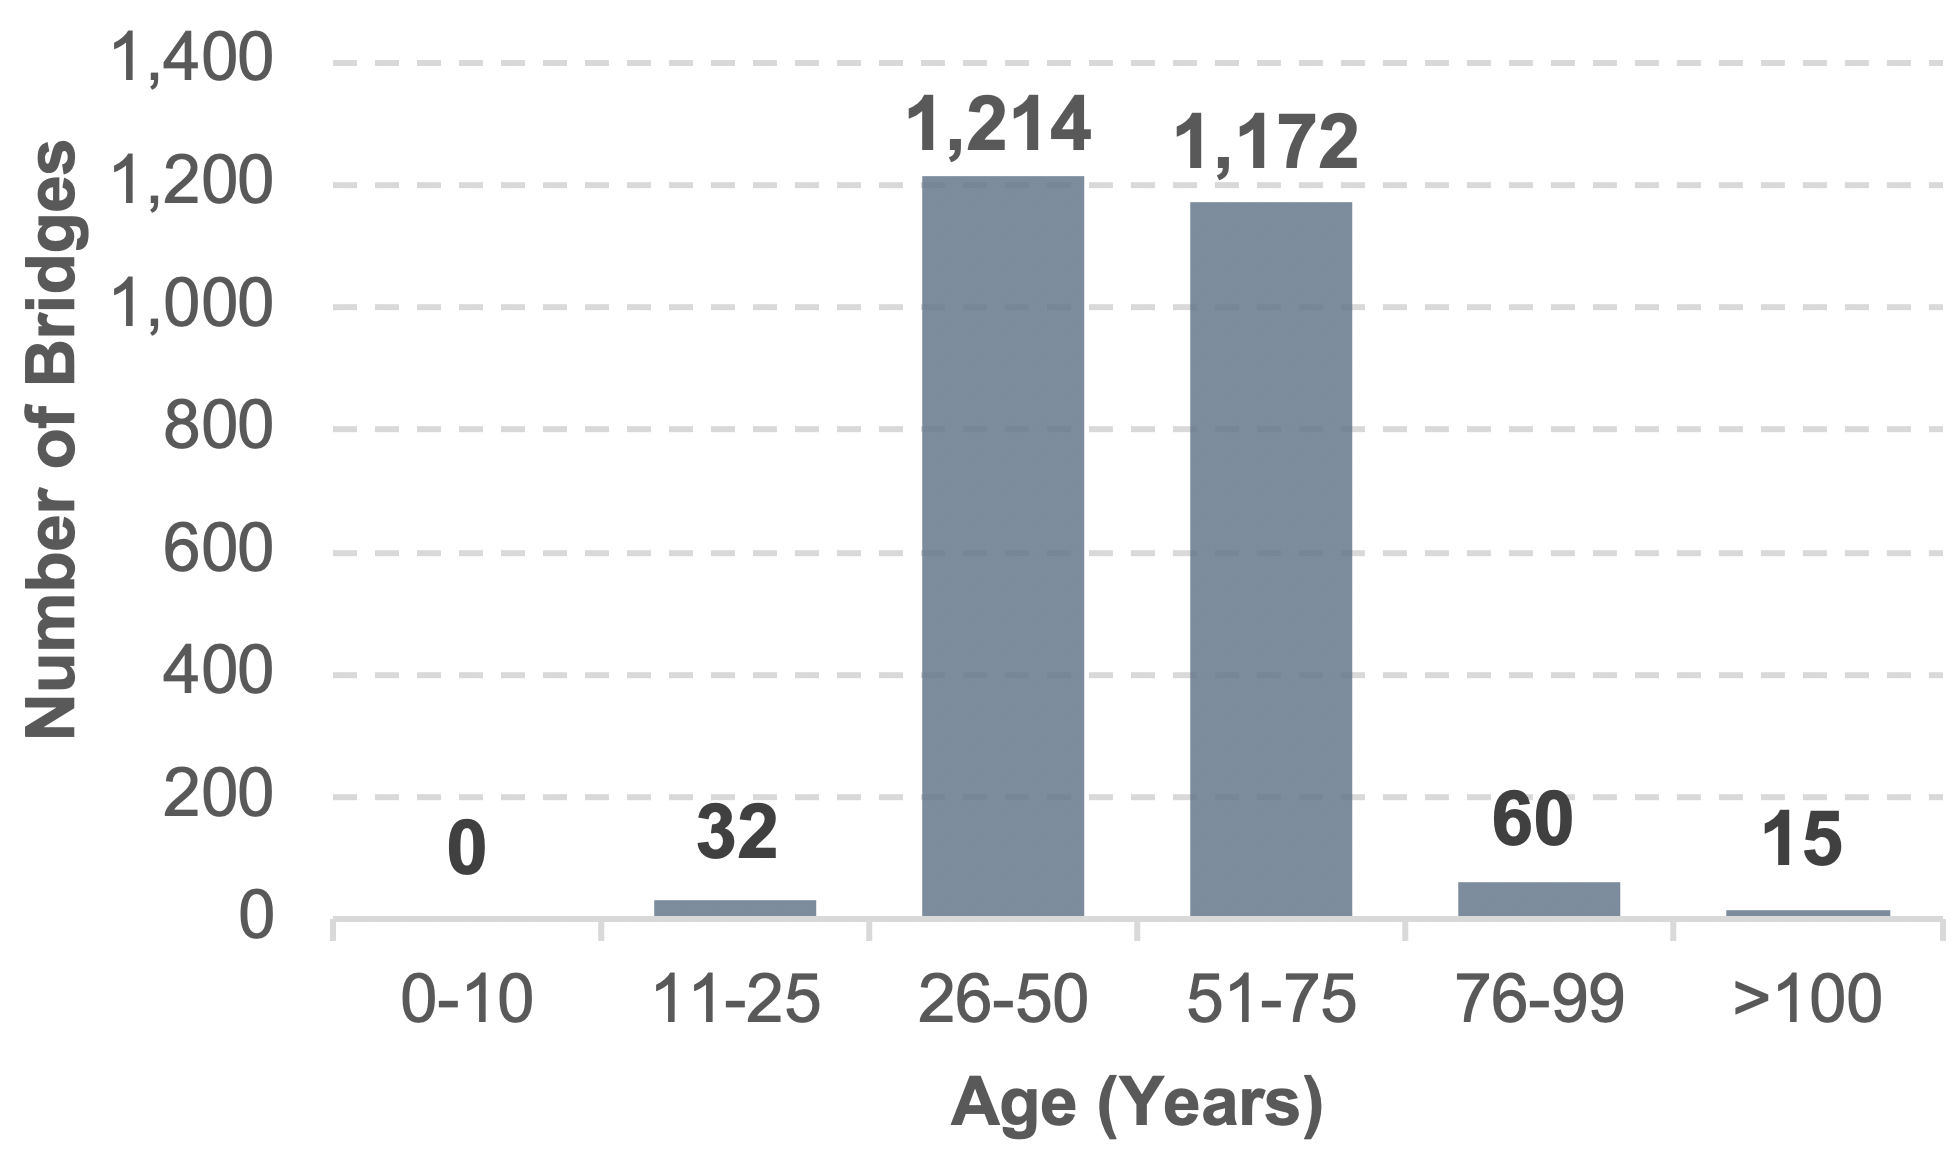 This bar chart shows the number of bridges with structural deficiencies on the NHFN organized by age group. Most structurally deficient bridges are between the ages of 25 and 75, and the number of structurally deficient bridges is less for very new or very old bridges. The largest number of structurally deficient bridges (1,214) are 25-50 years old. The second largest number of structurally deficient bridges (1,172) are 51-75 years old. There are no structurally deficient bridges that are 10 years old or less.